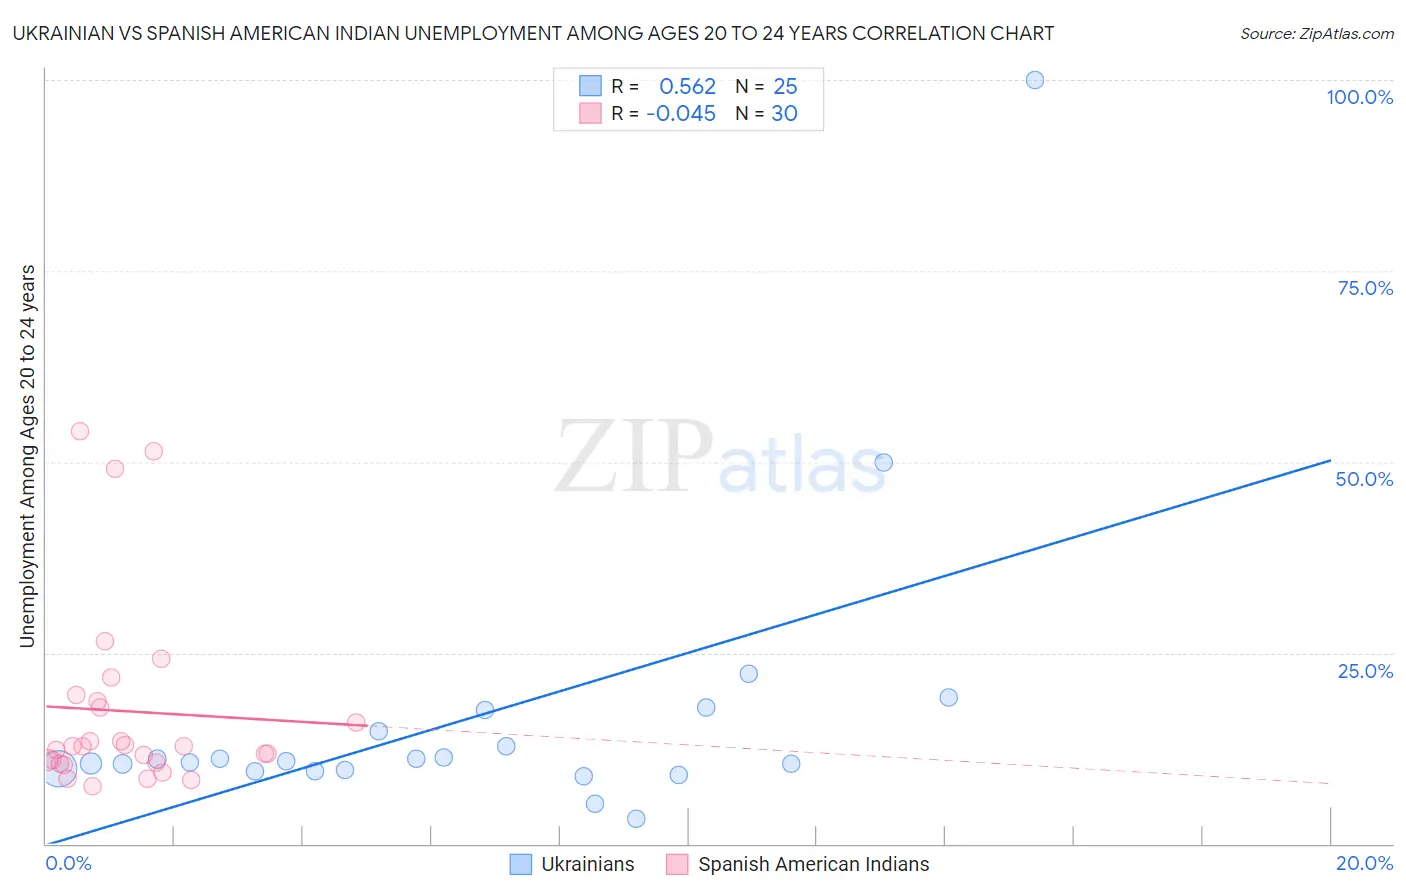 Ukrainian vs Spanish American Indian Unemployment Among Ages 20 to 24 years